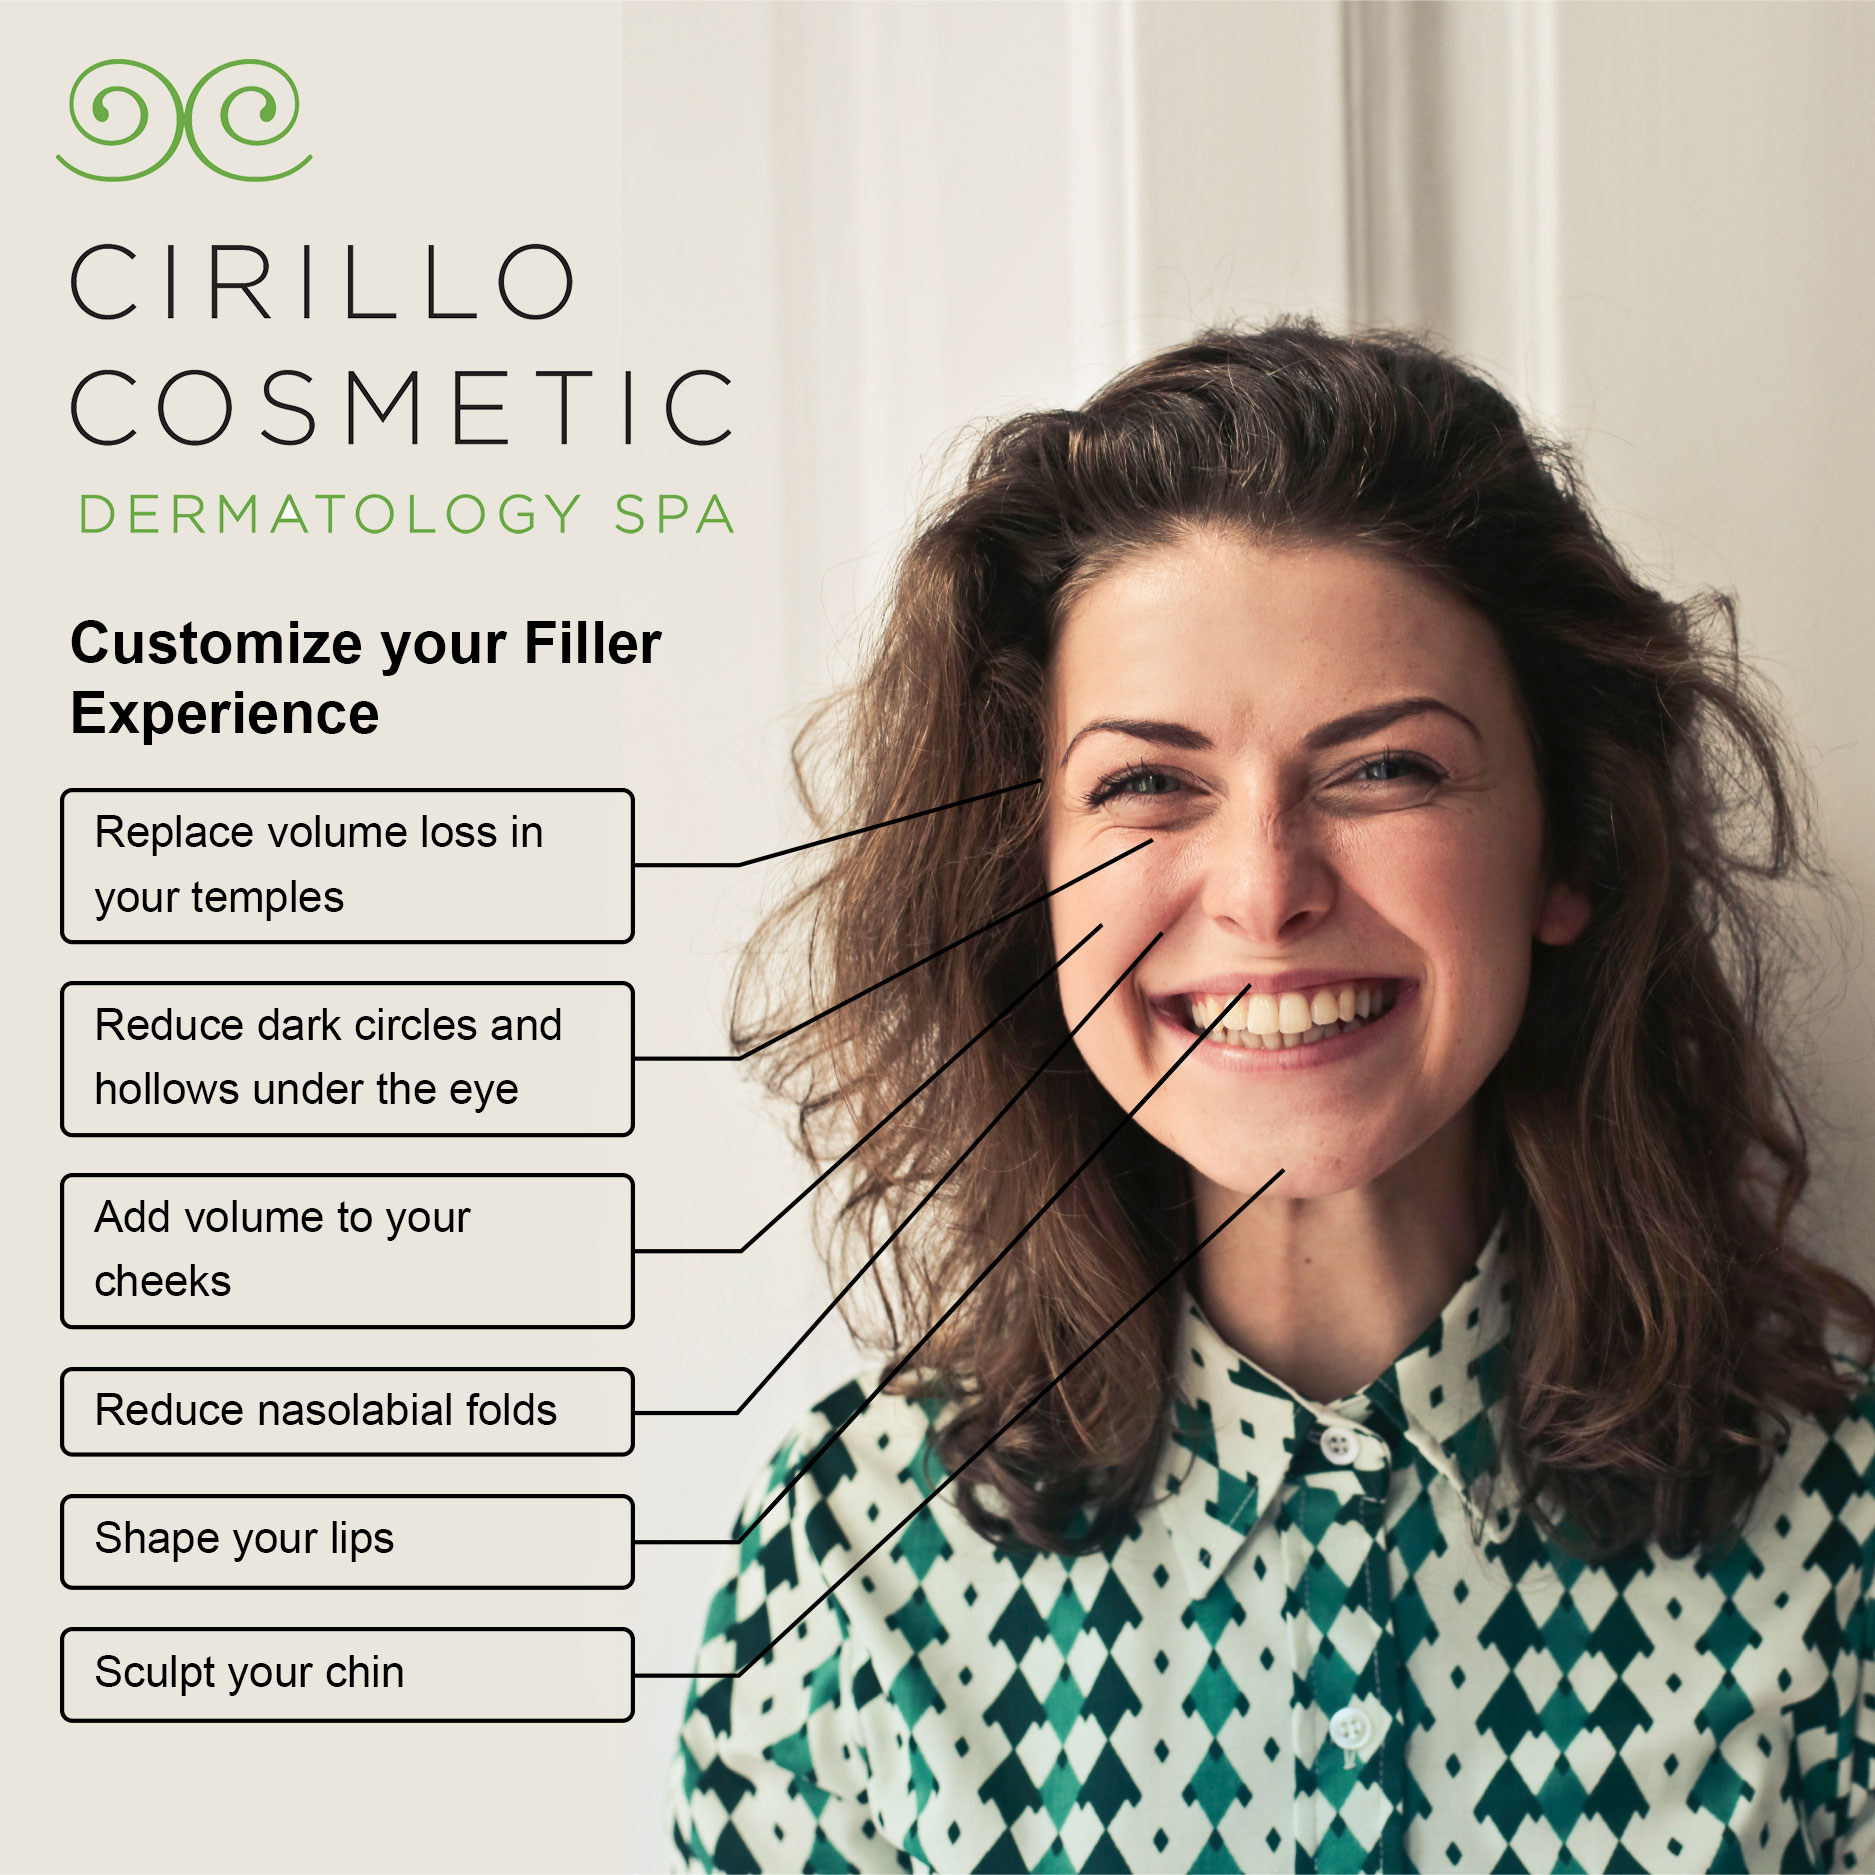 Cirillo Cosmetic Dermatology offers a range of injectables from Juvederm, Botox, Radiesse, Retylane and more, for patients from Bryn Mawr, Newtown Square, Philadelphia, and beyond.